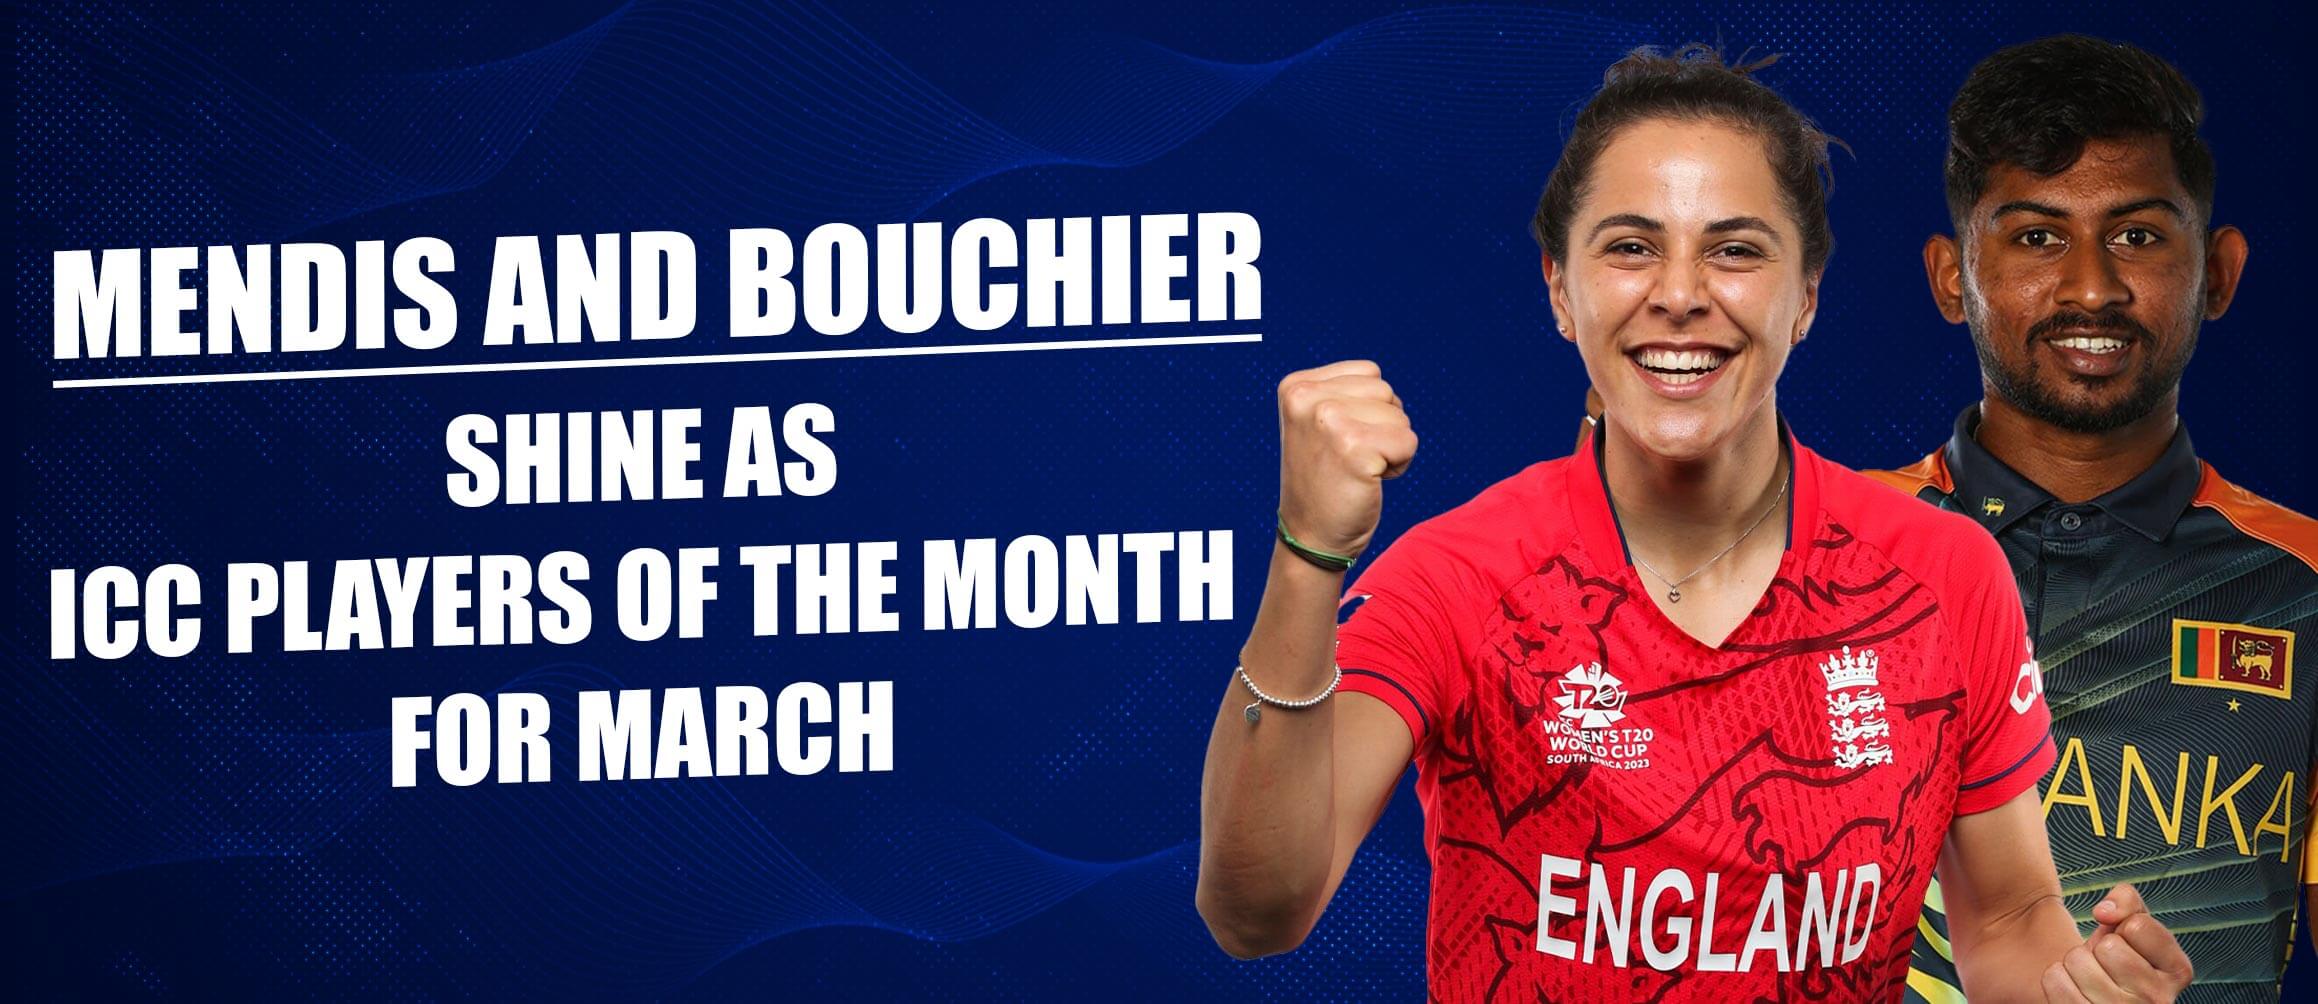 Mendis and Bouchier Shine as ICC Players of the Month for March